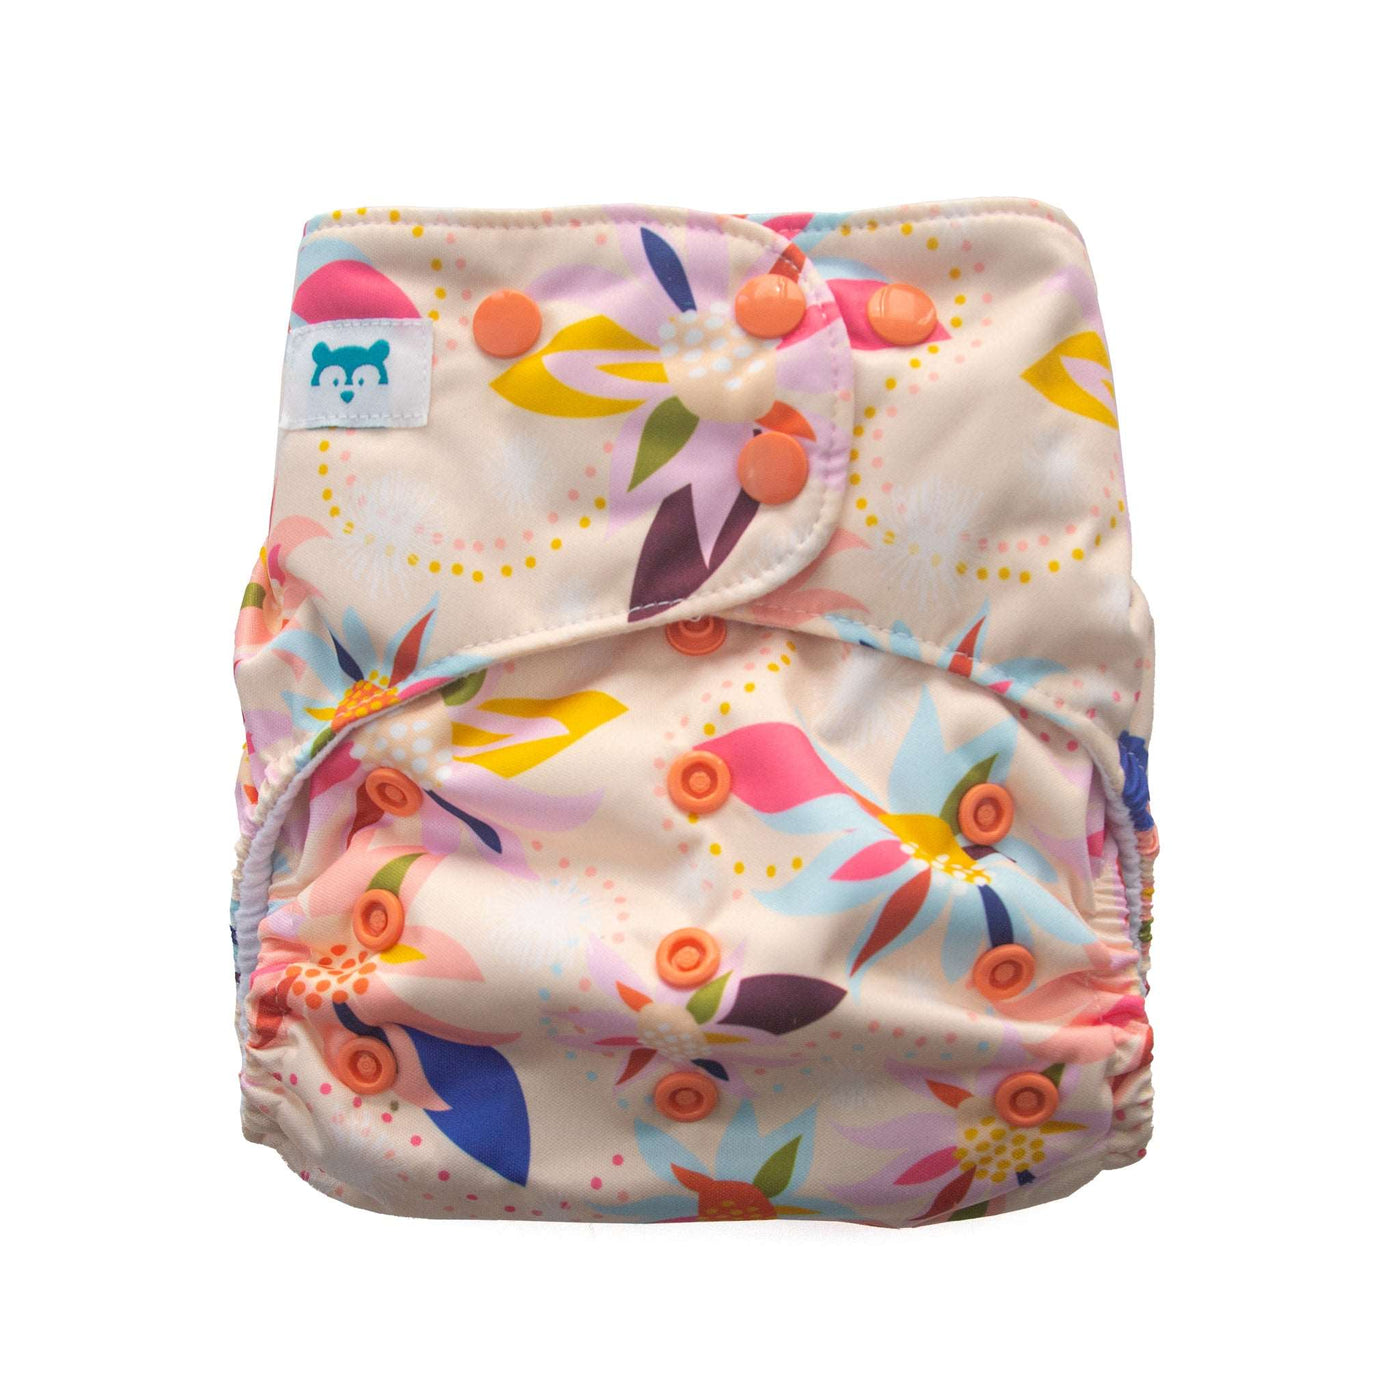 Cloth nappy with Australian flowers